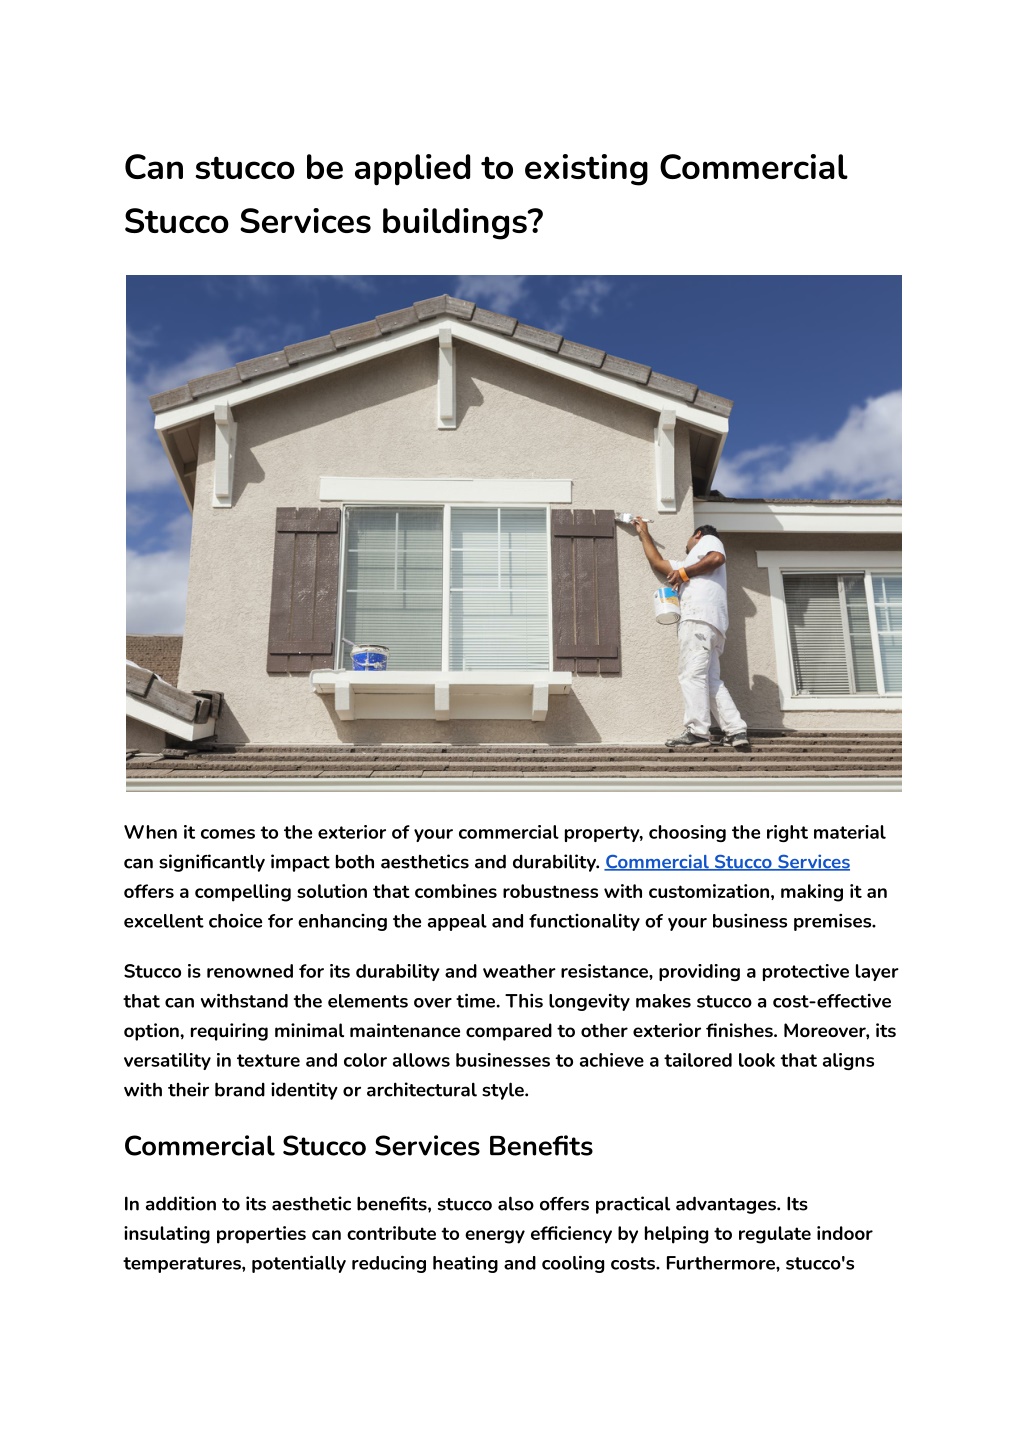 PPT - Can stucco be applied to existing Commercial Stucco Services ...